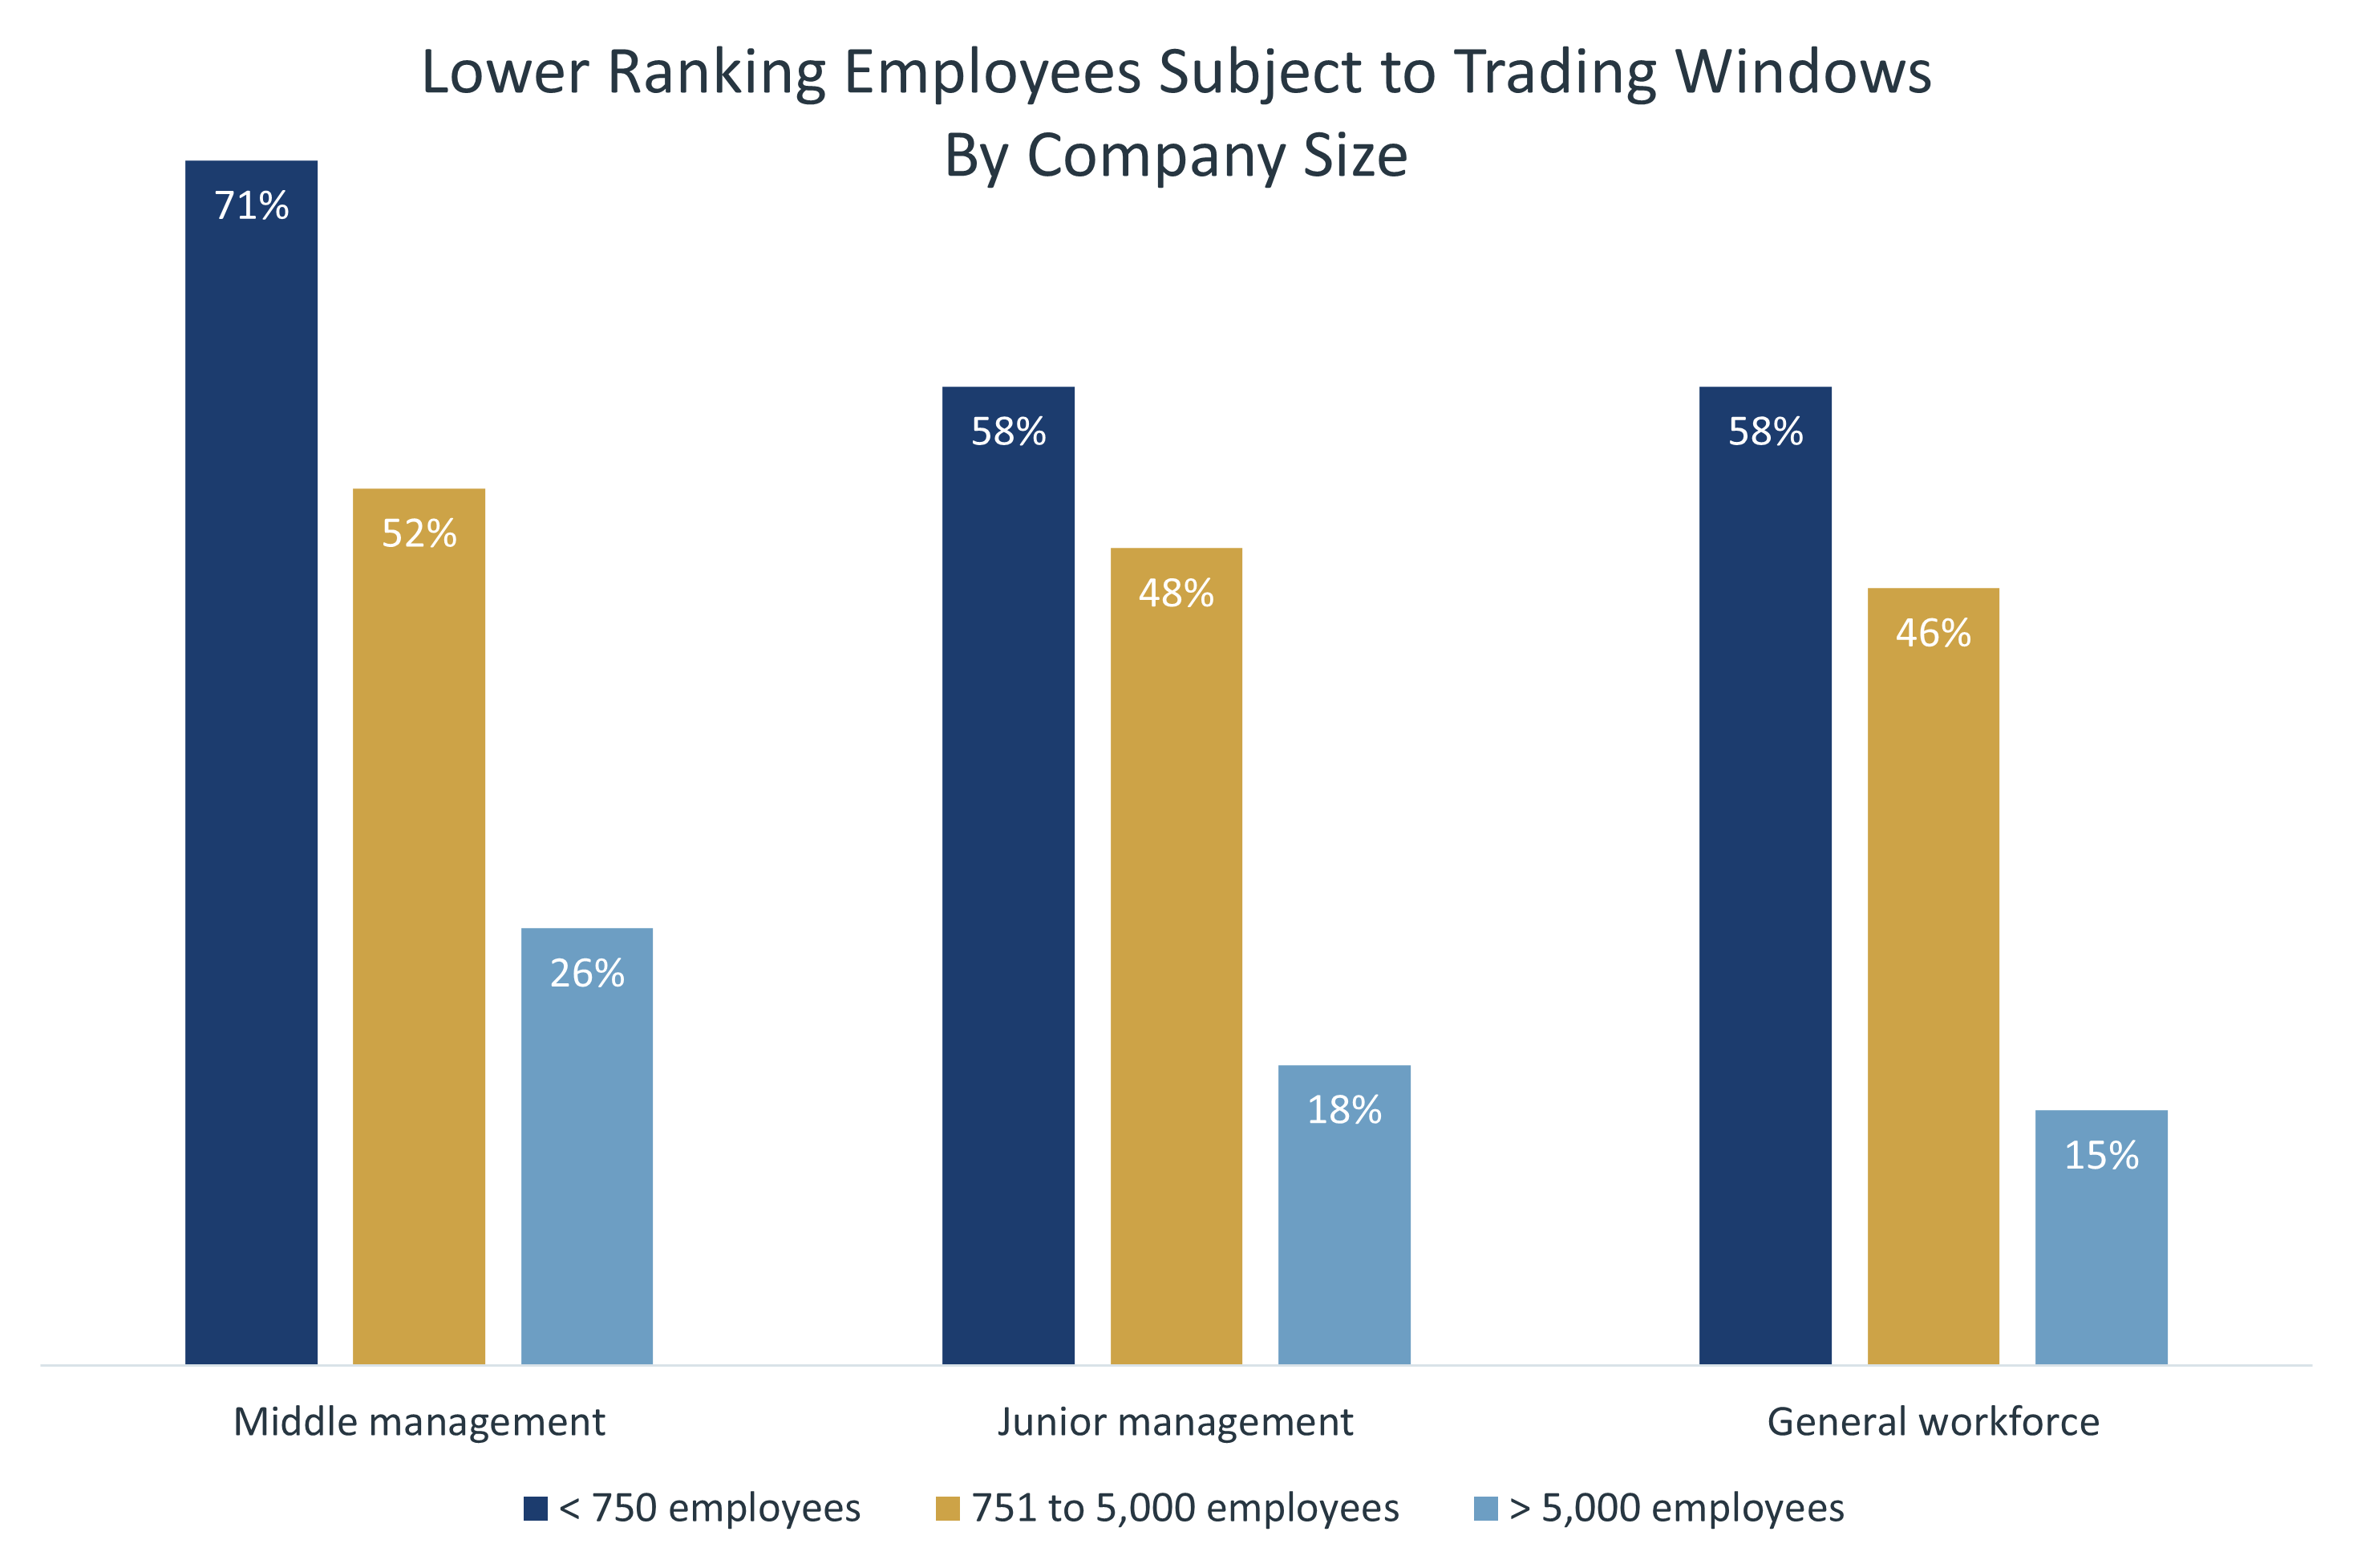 Chart showing percentage of companies that subject middle managers, junior managers, and general workforce to trading windows.